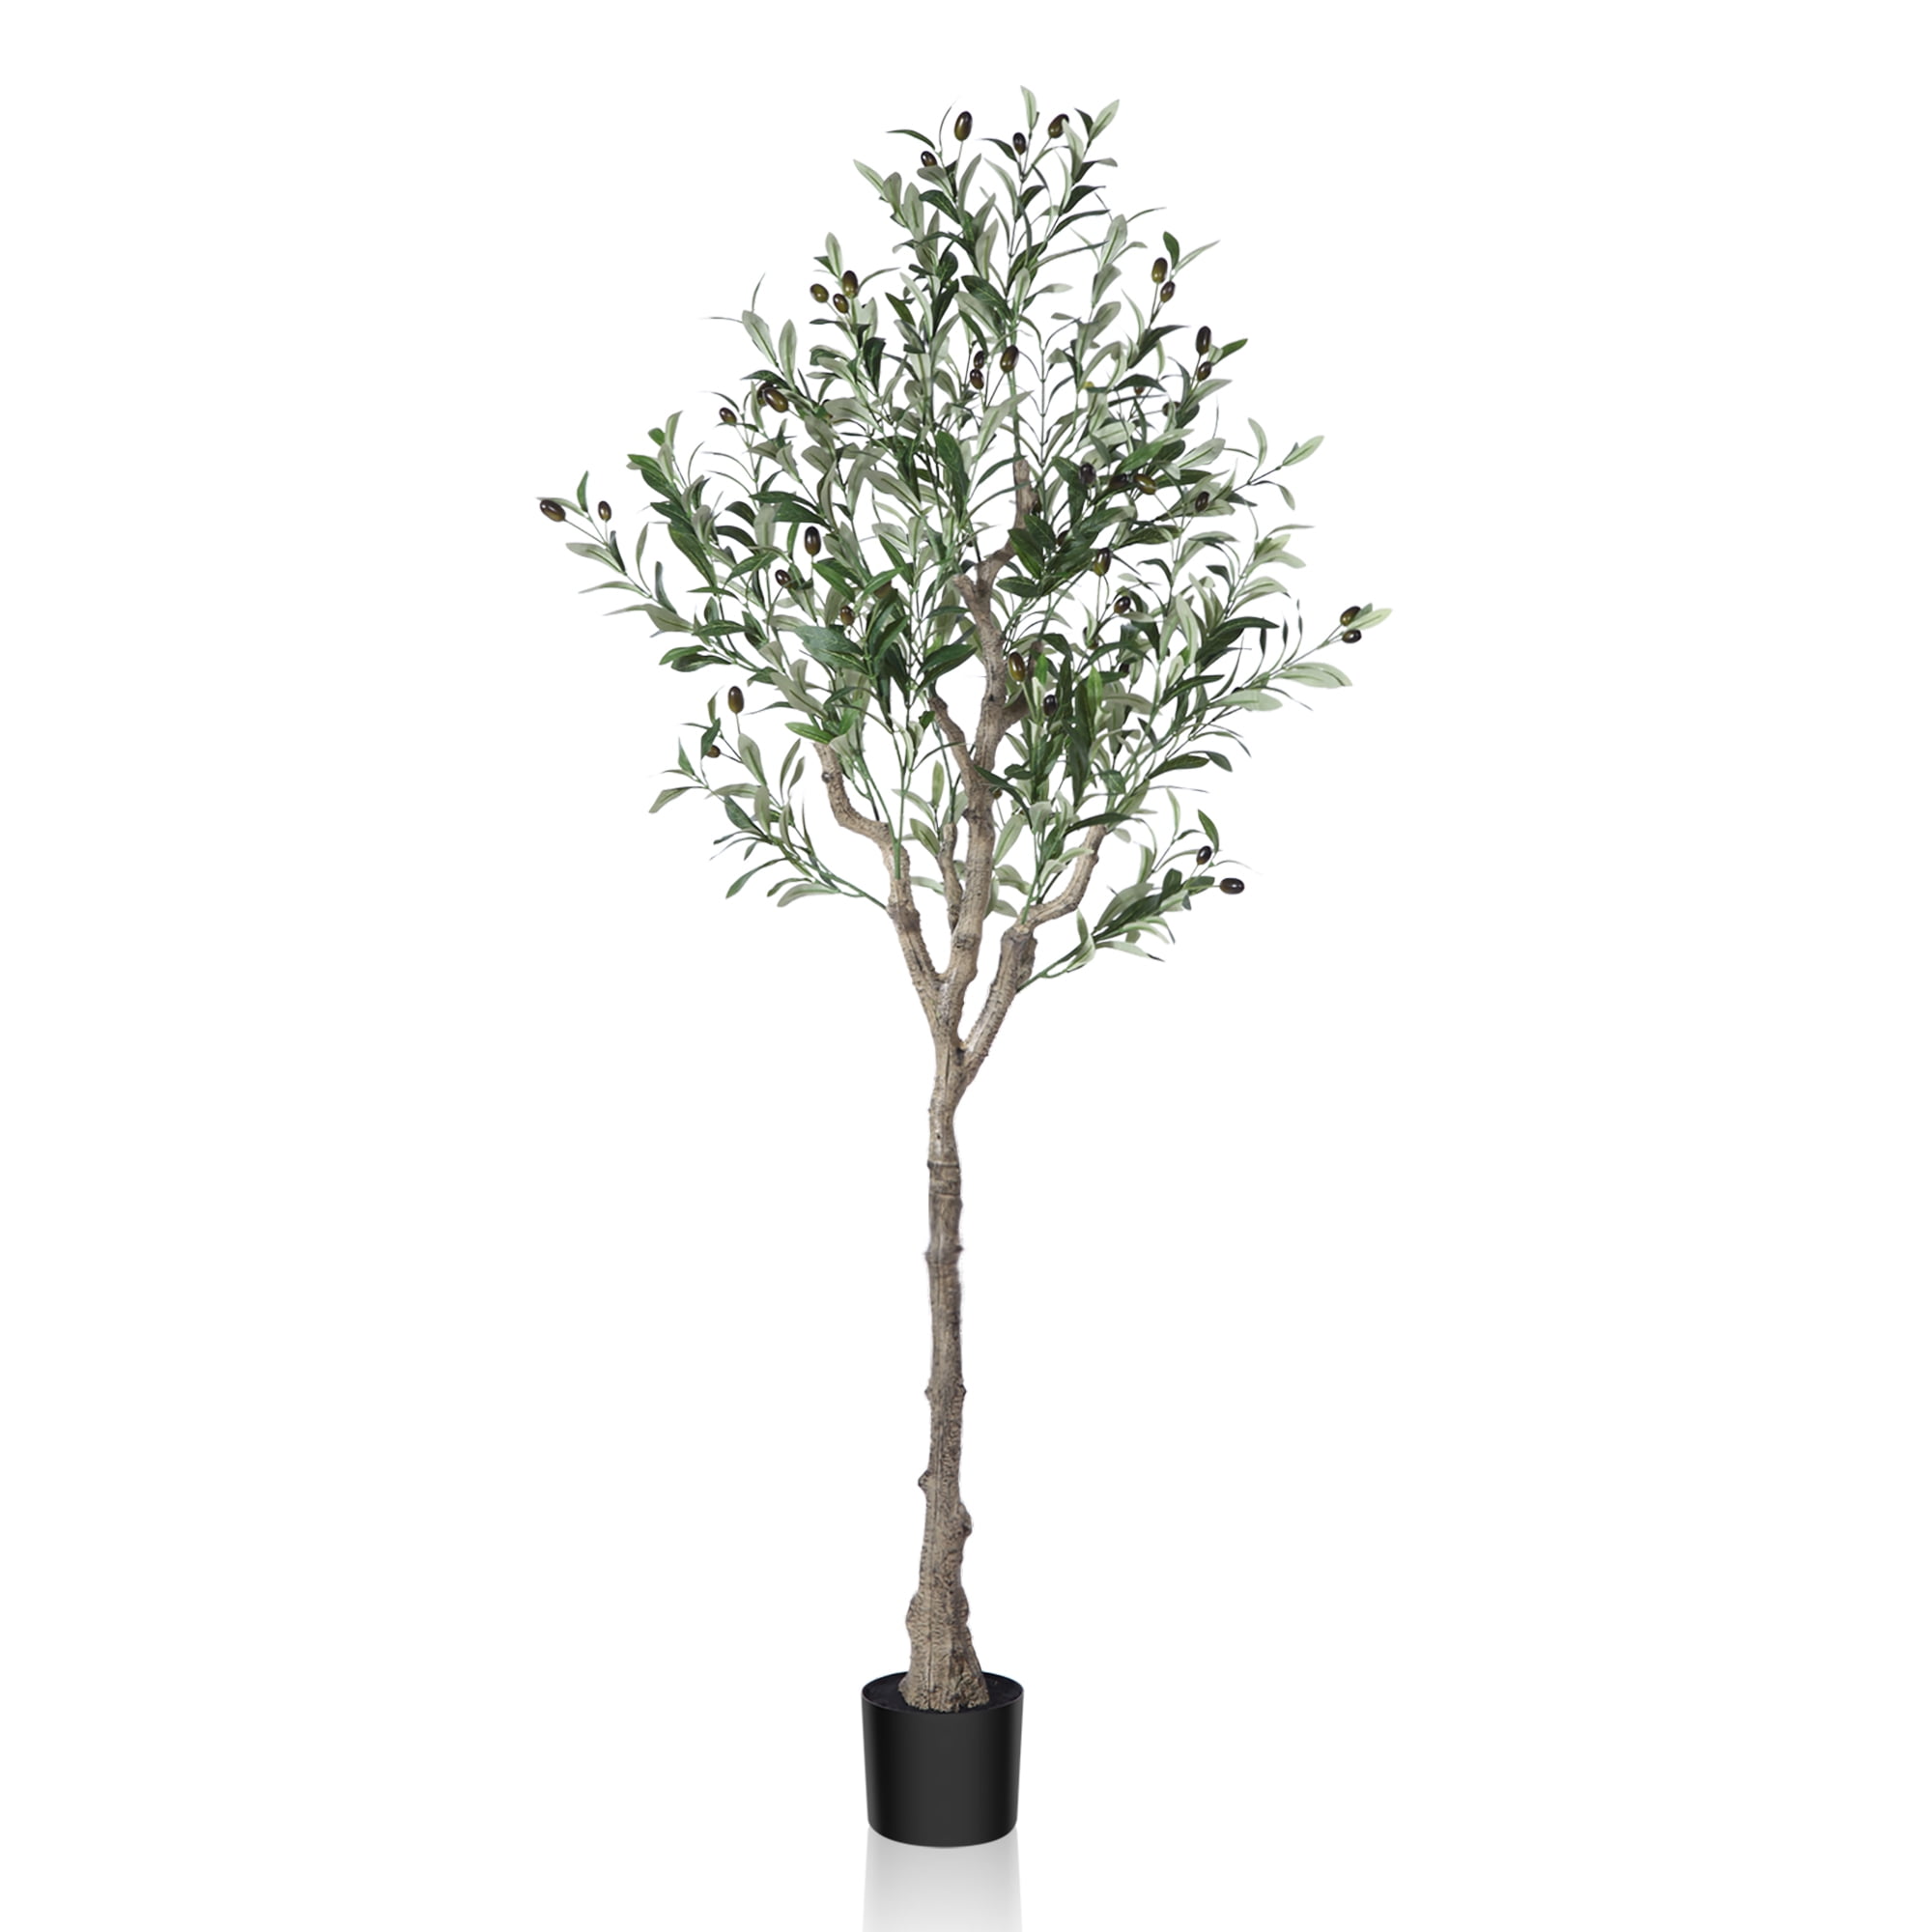 6 ft. Indoor/Outdoor Artificial Olive Tree - Potted Faux Floor Plant with  Fruit - Natural Looking Greenery Decoration 902425HTZ - The Home Depot